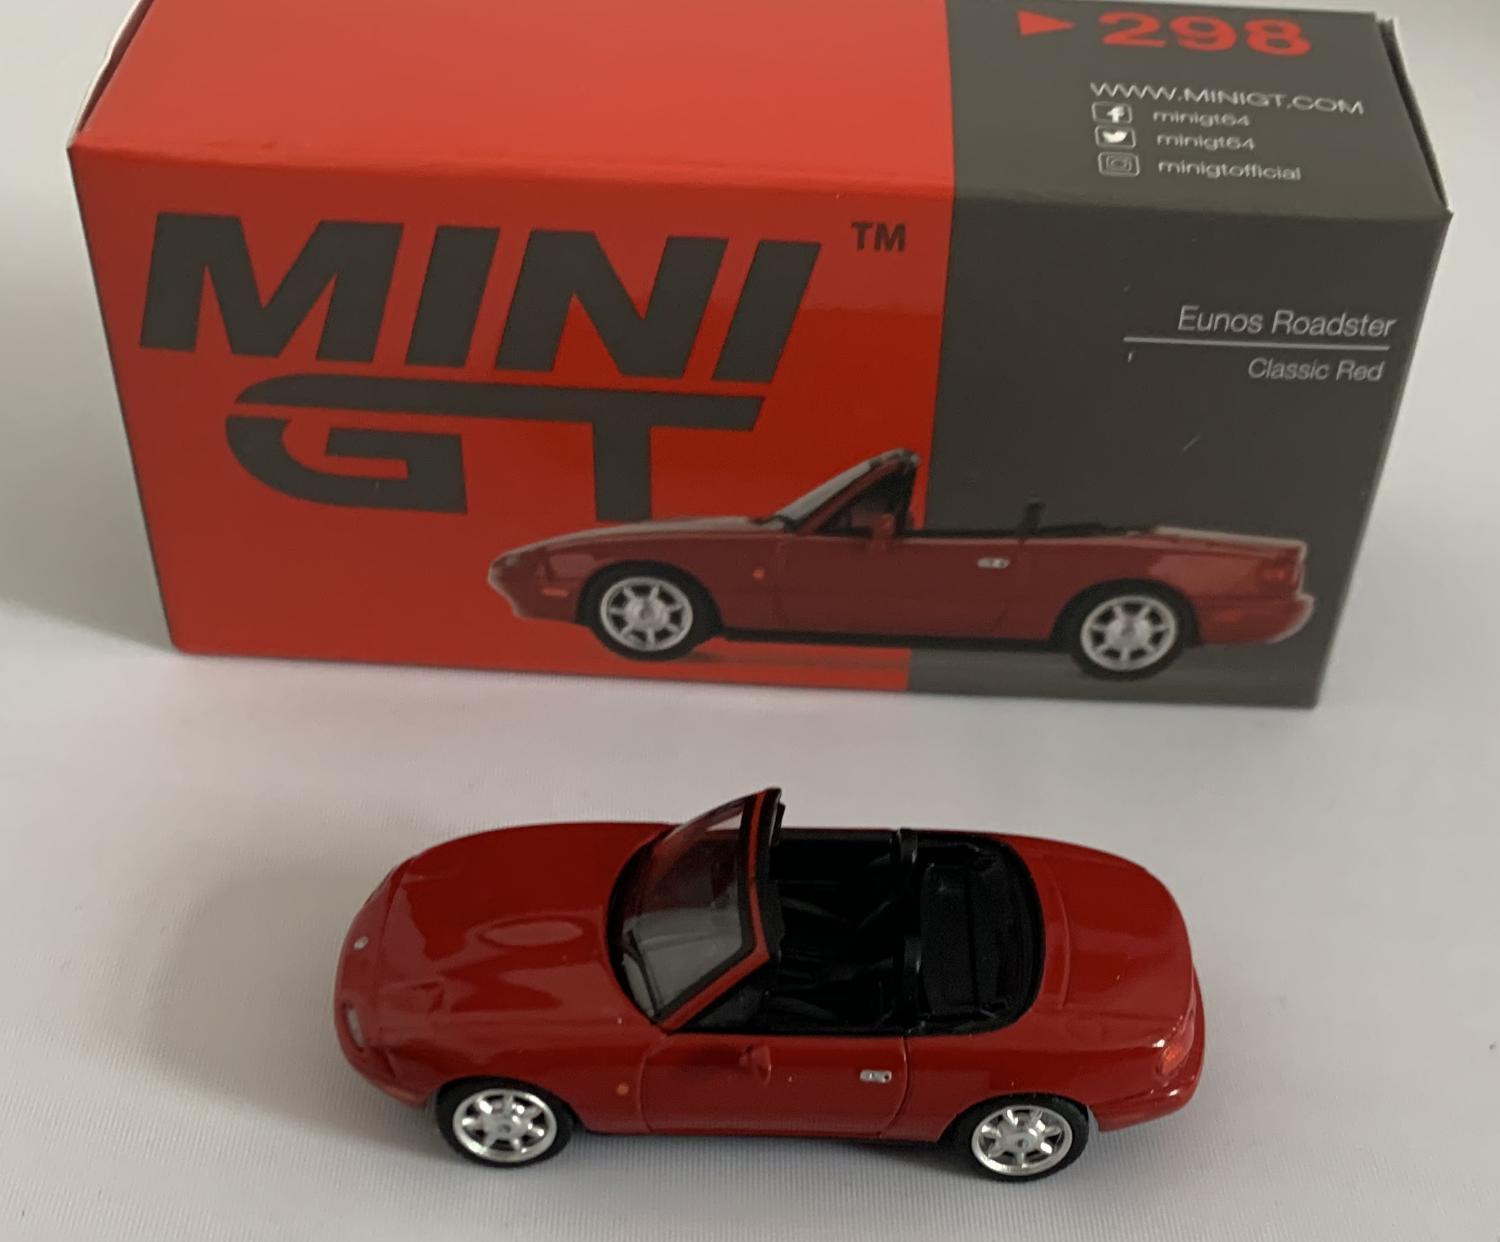 A good reproduction of the Eunos Roadster with detail throughout, all authentically recreated. The model is presented in a box, the car is approx. 6 cm long and the box is 10 cm long